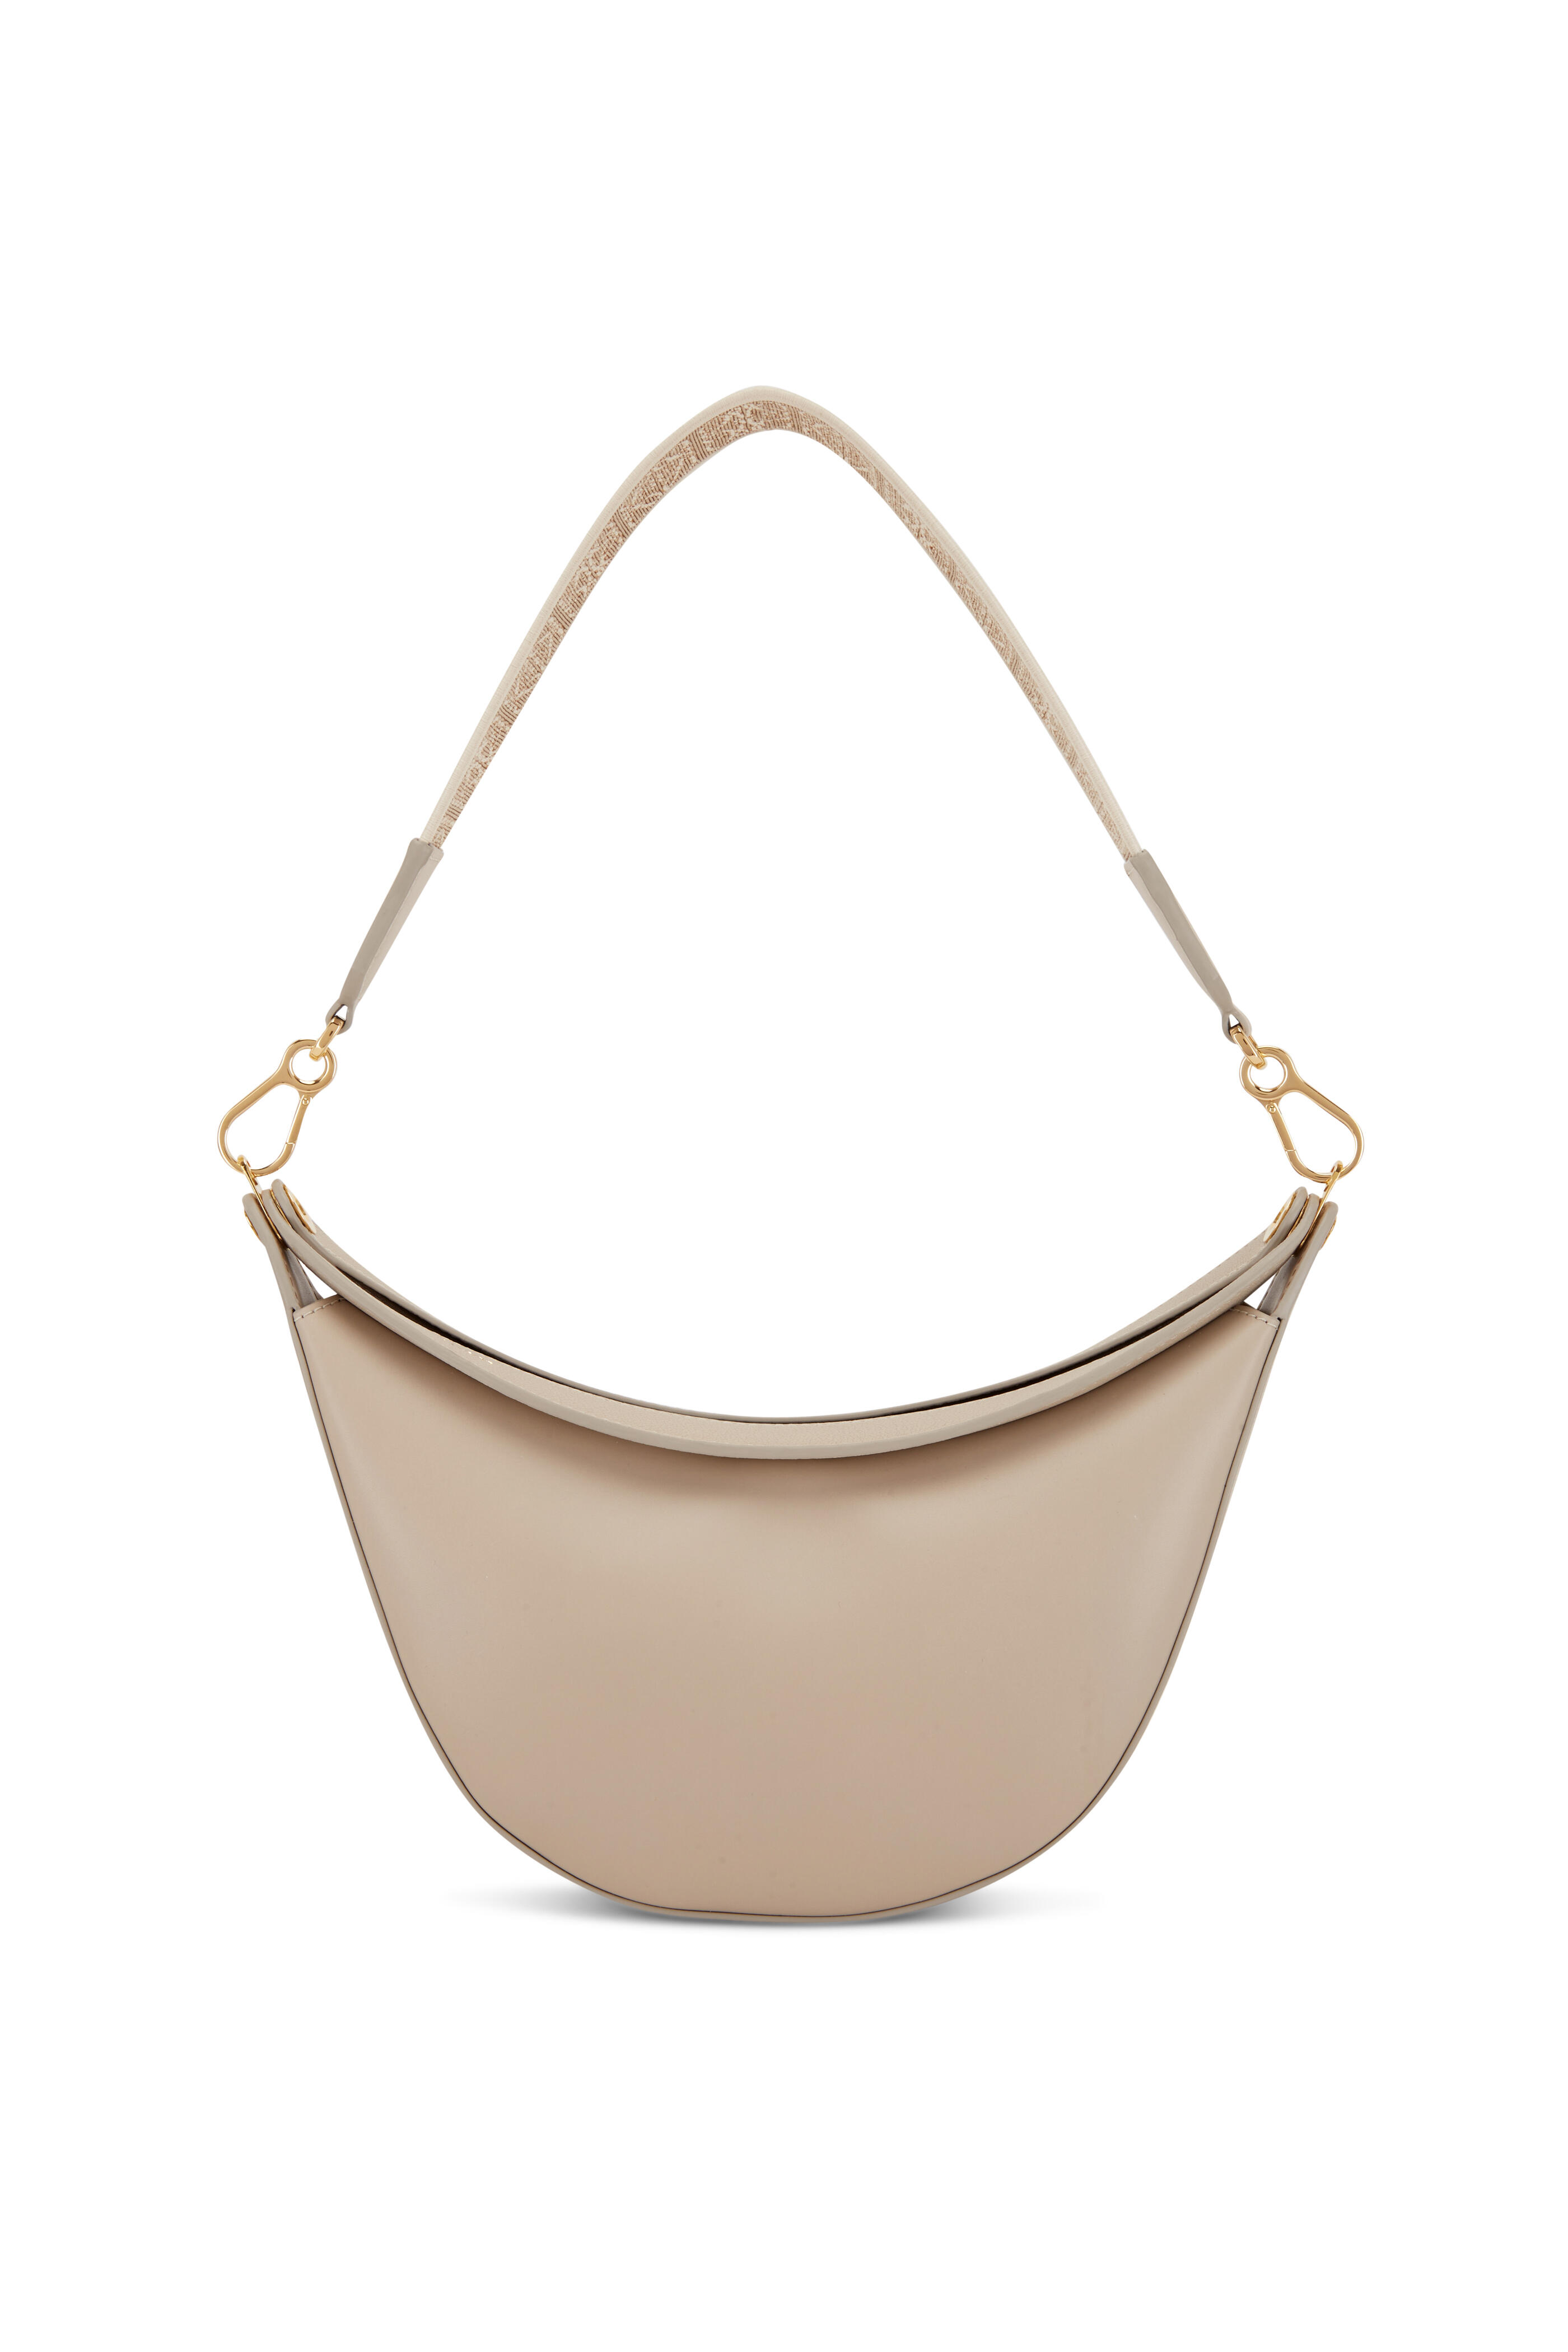 Loewe Women's Luna Avocado Leather Small Shoulder Bag | by Mitchell Stores